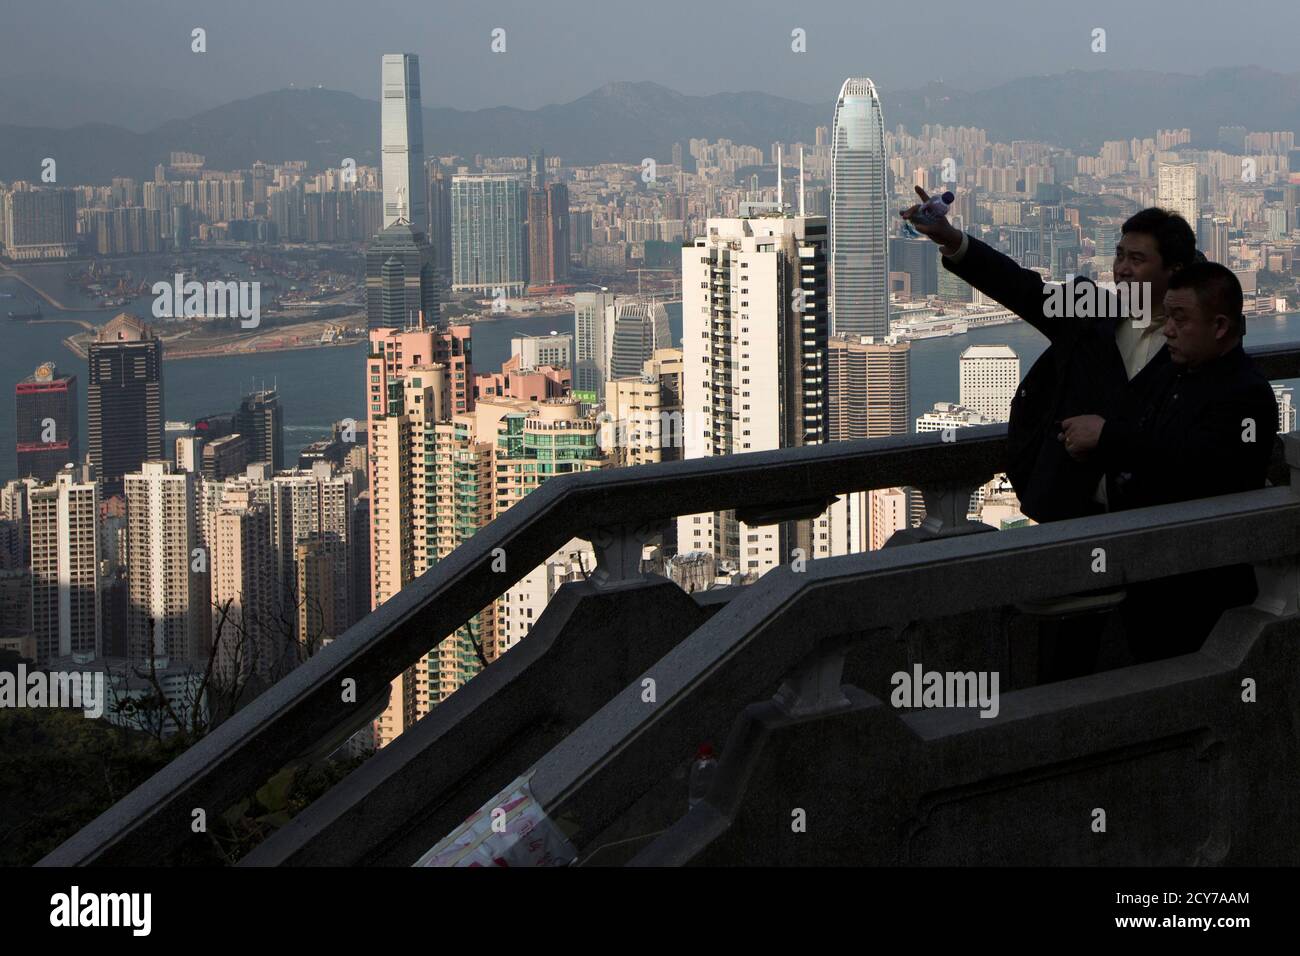 A mainland Chinese businessman points at a building from the Peak, a popular sightseeing spot for tourists, in Hong Kong January 14, 2014. Launched by the Hong Kong government over a decade ago to stimulate an economy battered by the Severe Acute Respiratory Syndrome (SARS) crisis, the Hong Kong Capital Investment Entrant Scheme has proved a hit with mainland Chinese who, though technically barred, see it as a means to invest money near home without the tight controls imposed by Beijing. Although governed by Beijing, Hong Kong has a high degree of autonomy. Picture taken January 14, 2014.    R Stock Photo